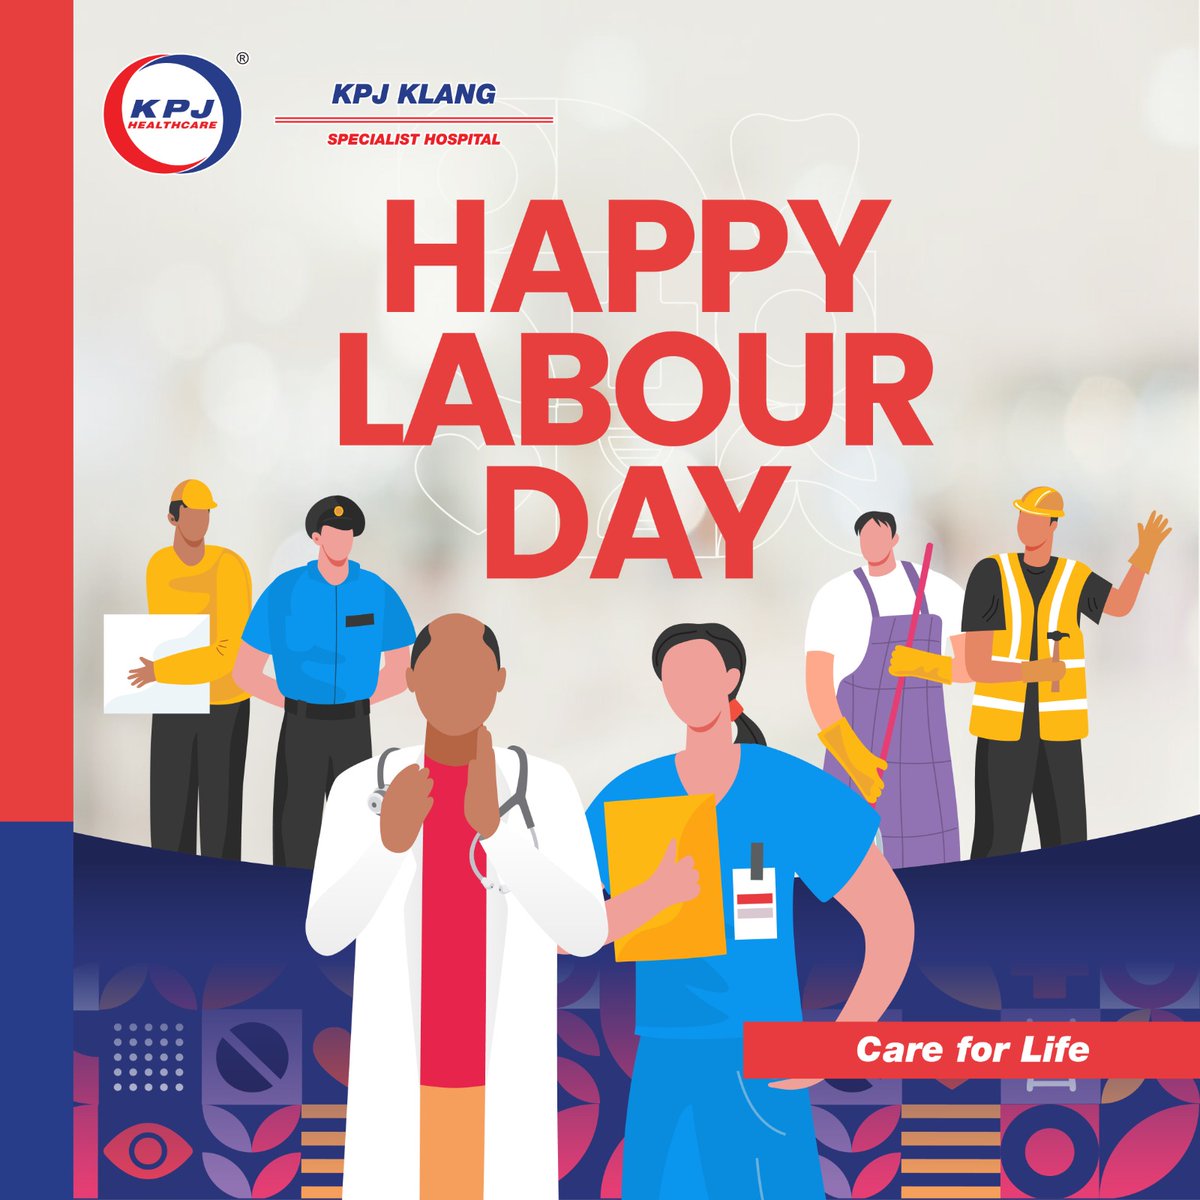 Today, we honour those who continue to work tirelessly. We celebrate them for their exceptional commitment and dedicated hard work, including our own #TeamKPJ, who has been providing exceptional care for Malaysians for more than four decades, because we #CareforLife.